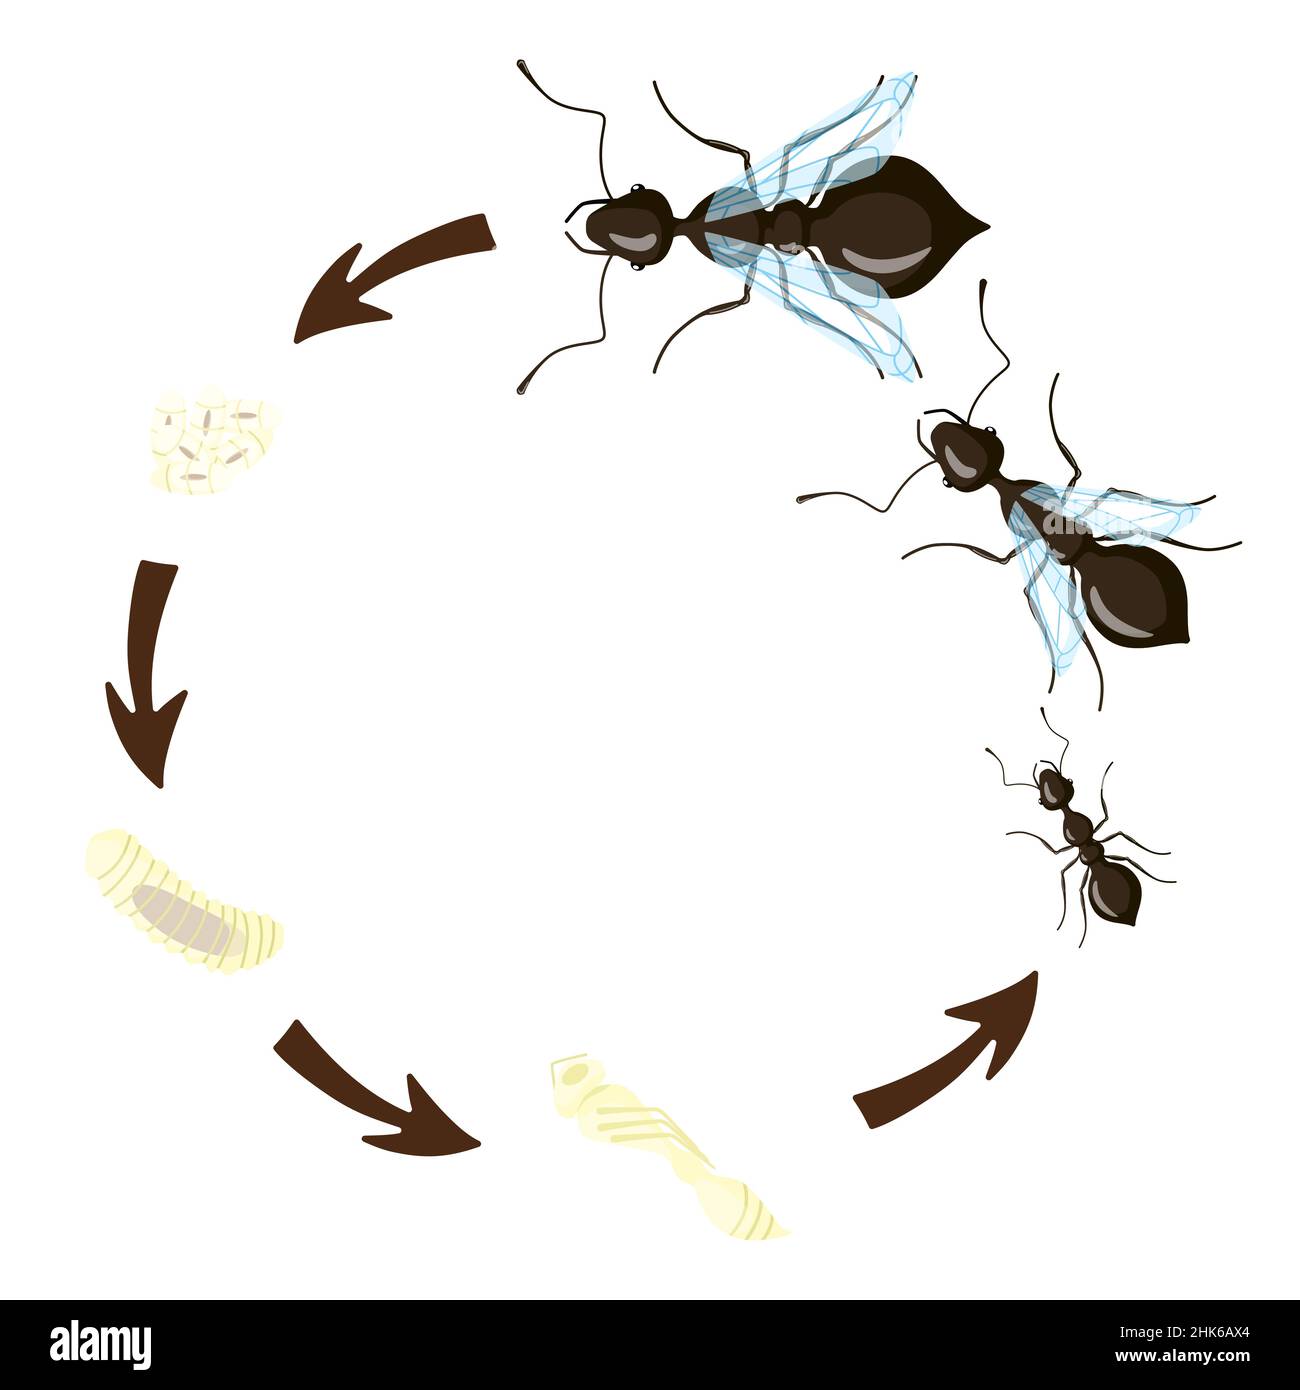 Ant Life Cycle isolated on white background. Stage of development ants larva, pupa, egg, queen, male and worker. Vector illustration. Stock Vector